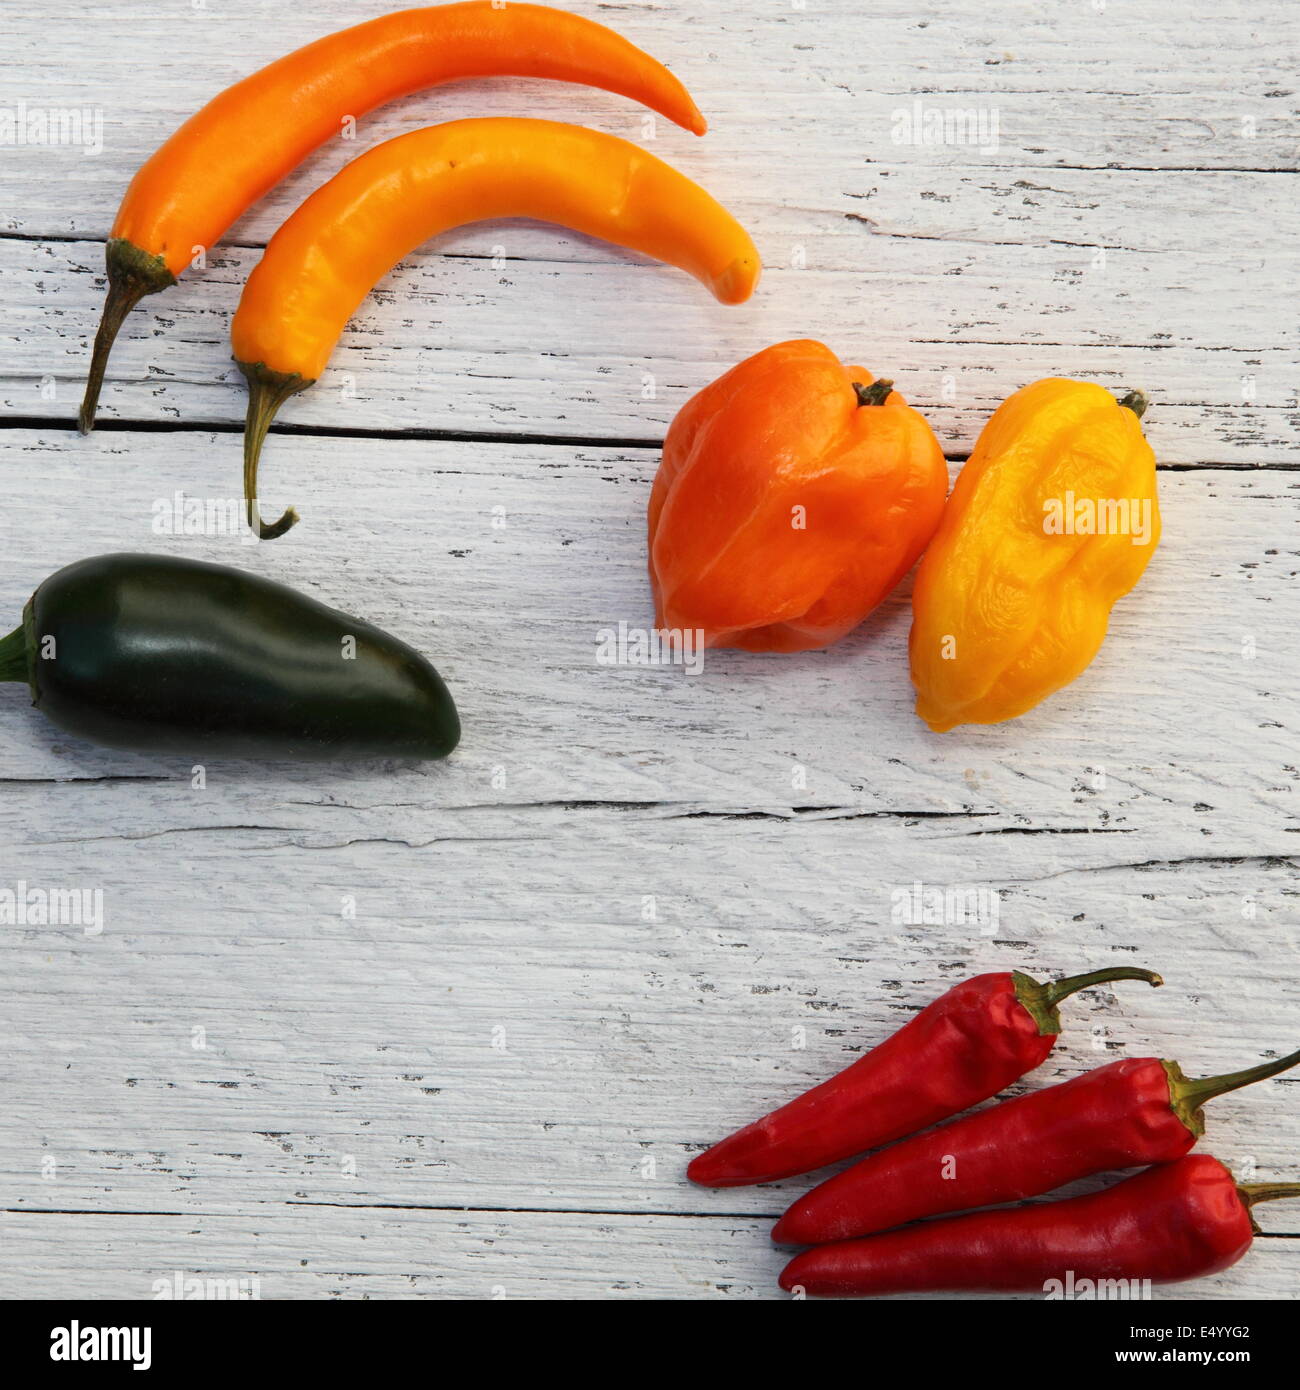 Bright colourful assorted peppers Stock Photo